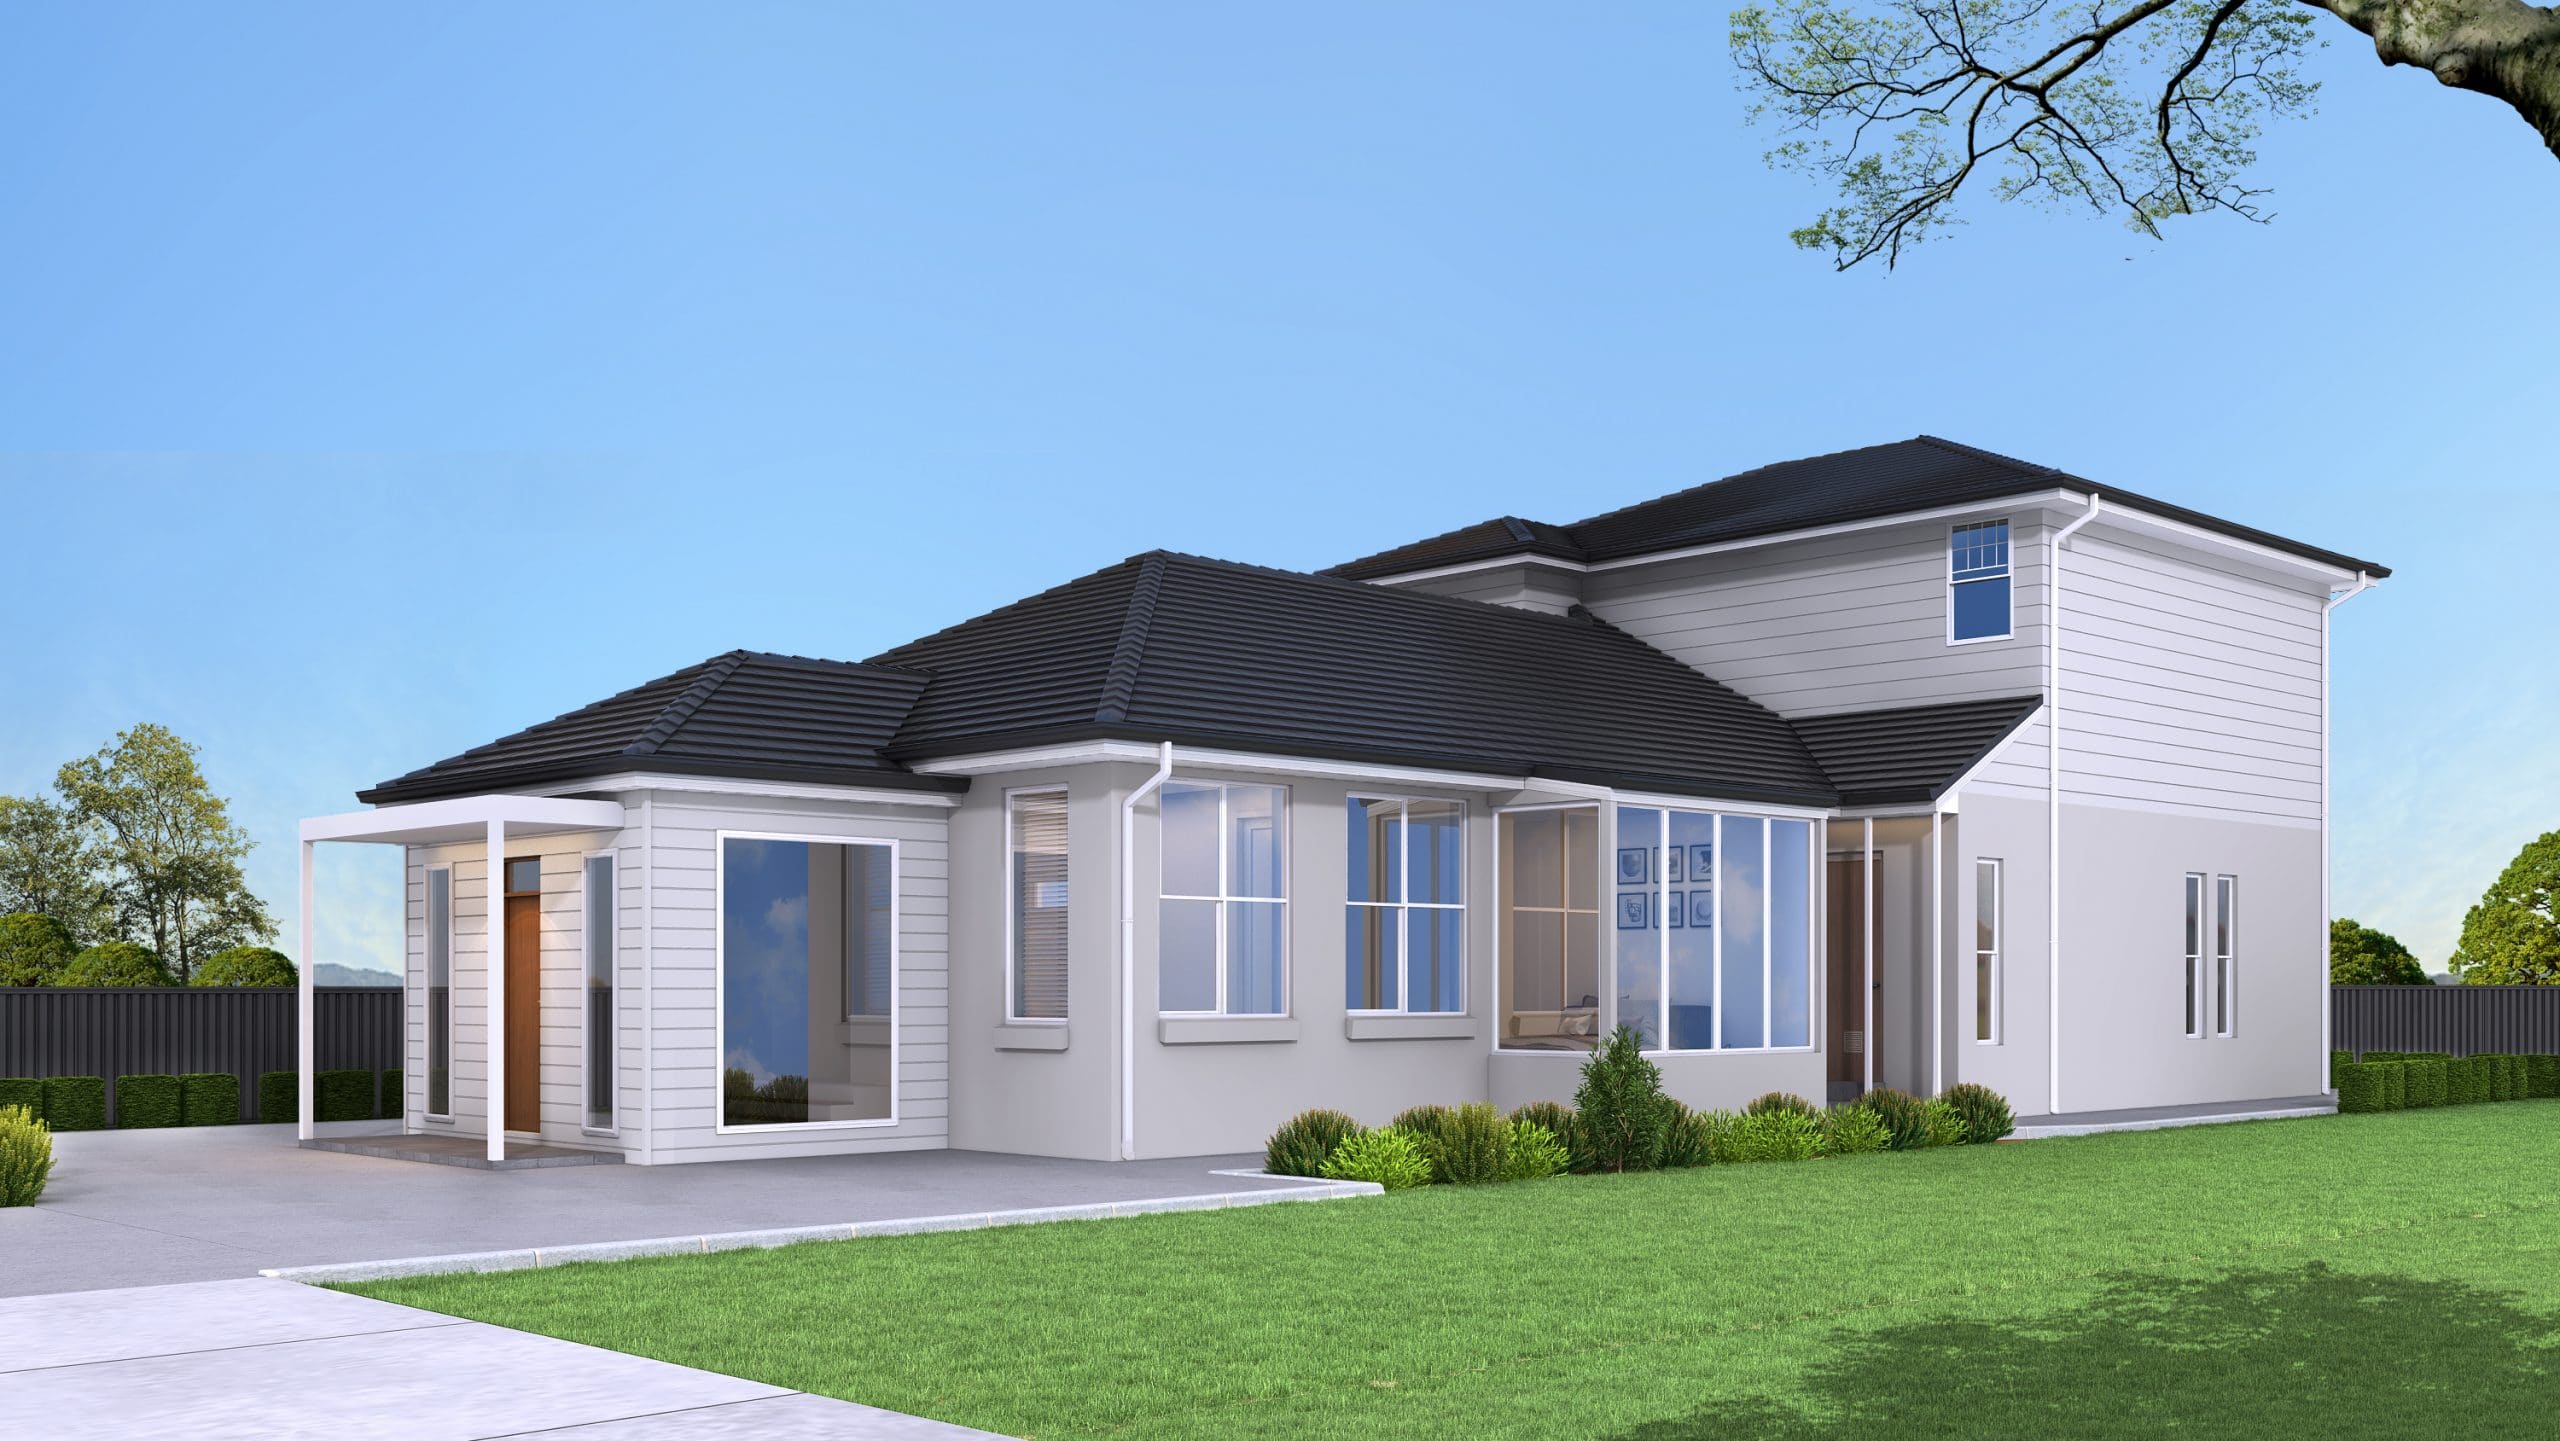 Render of a first floor addition to a home in Vaucluse